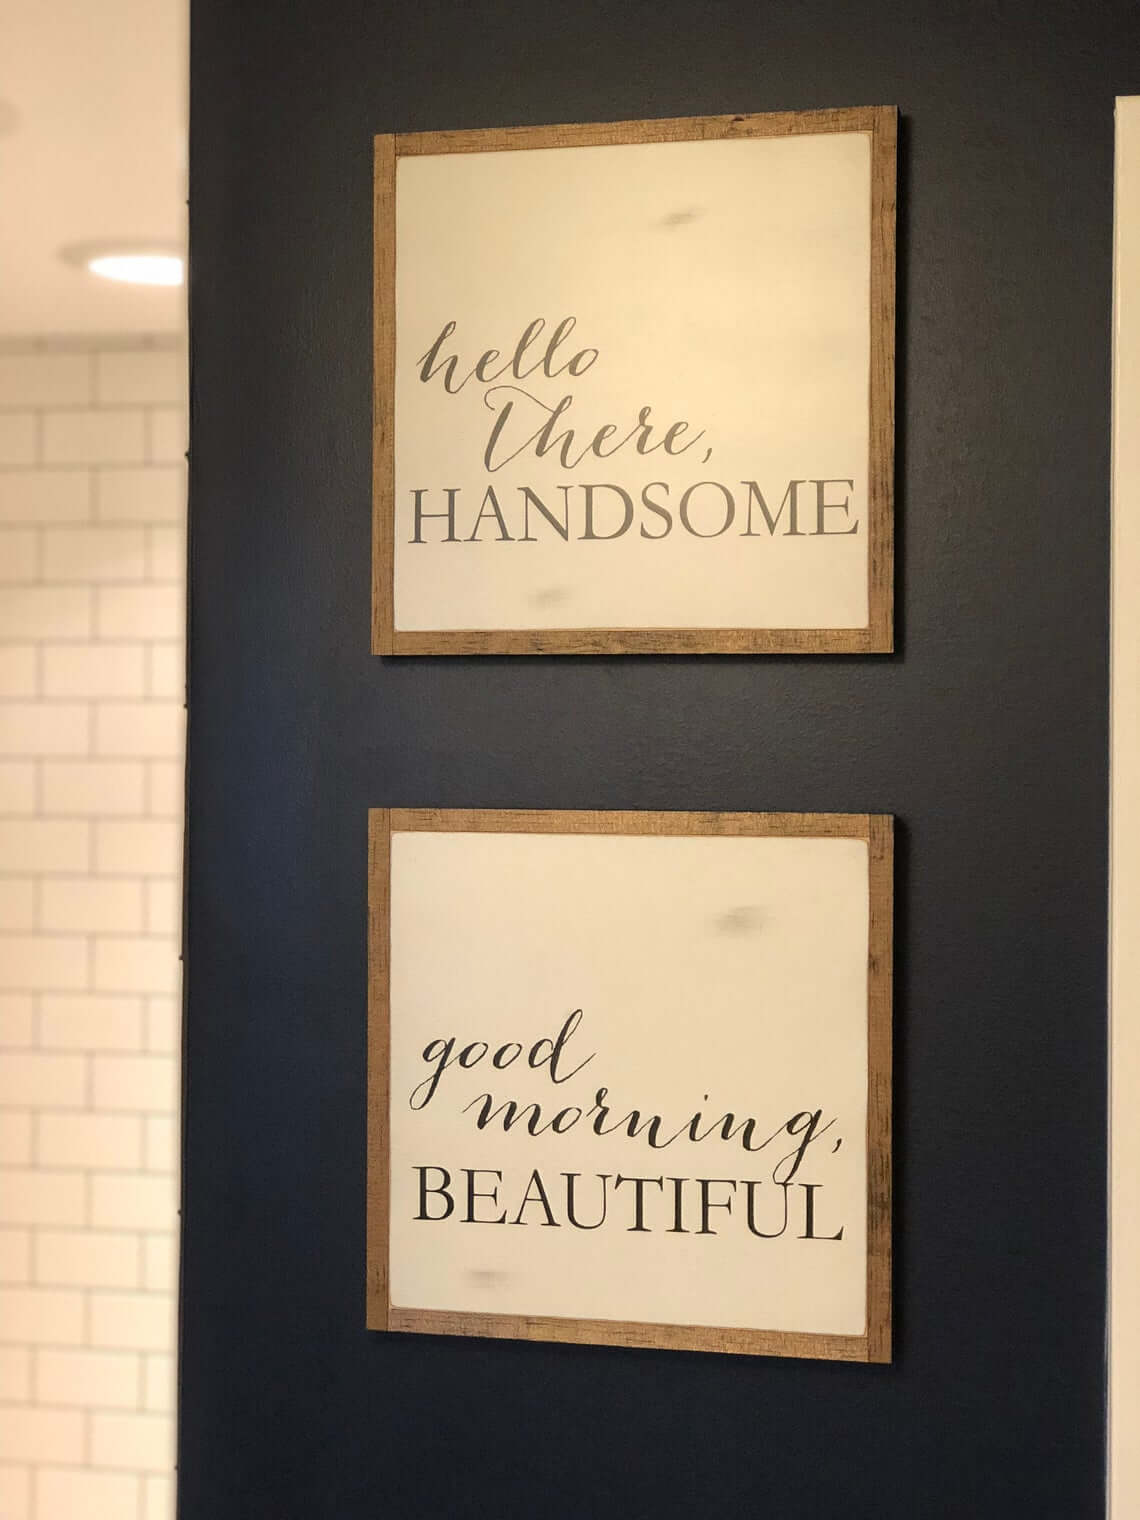 Get Your Gorgeous On in this Bathroom